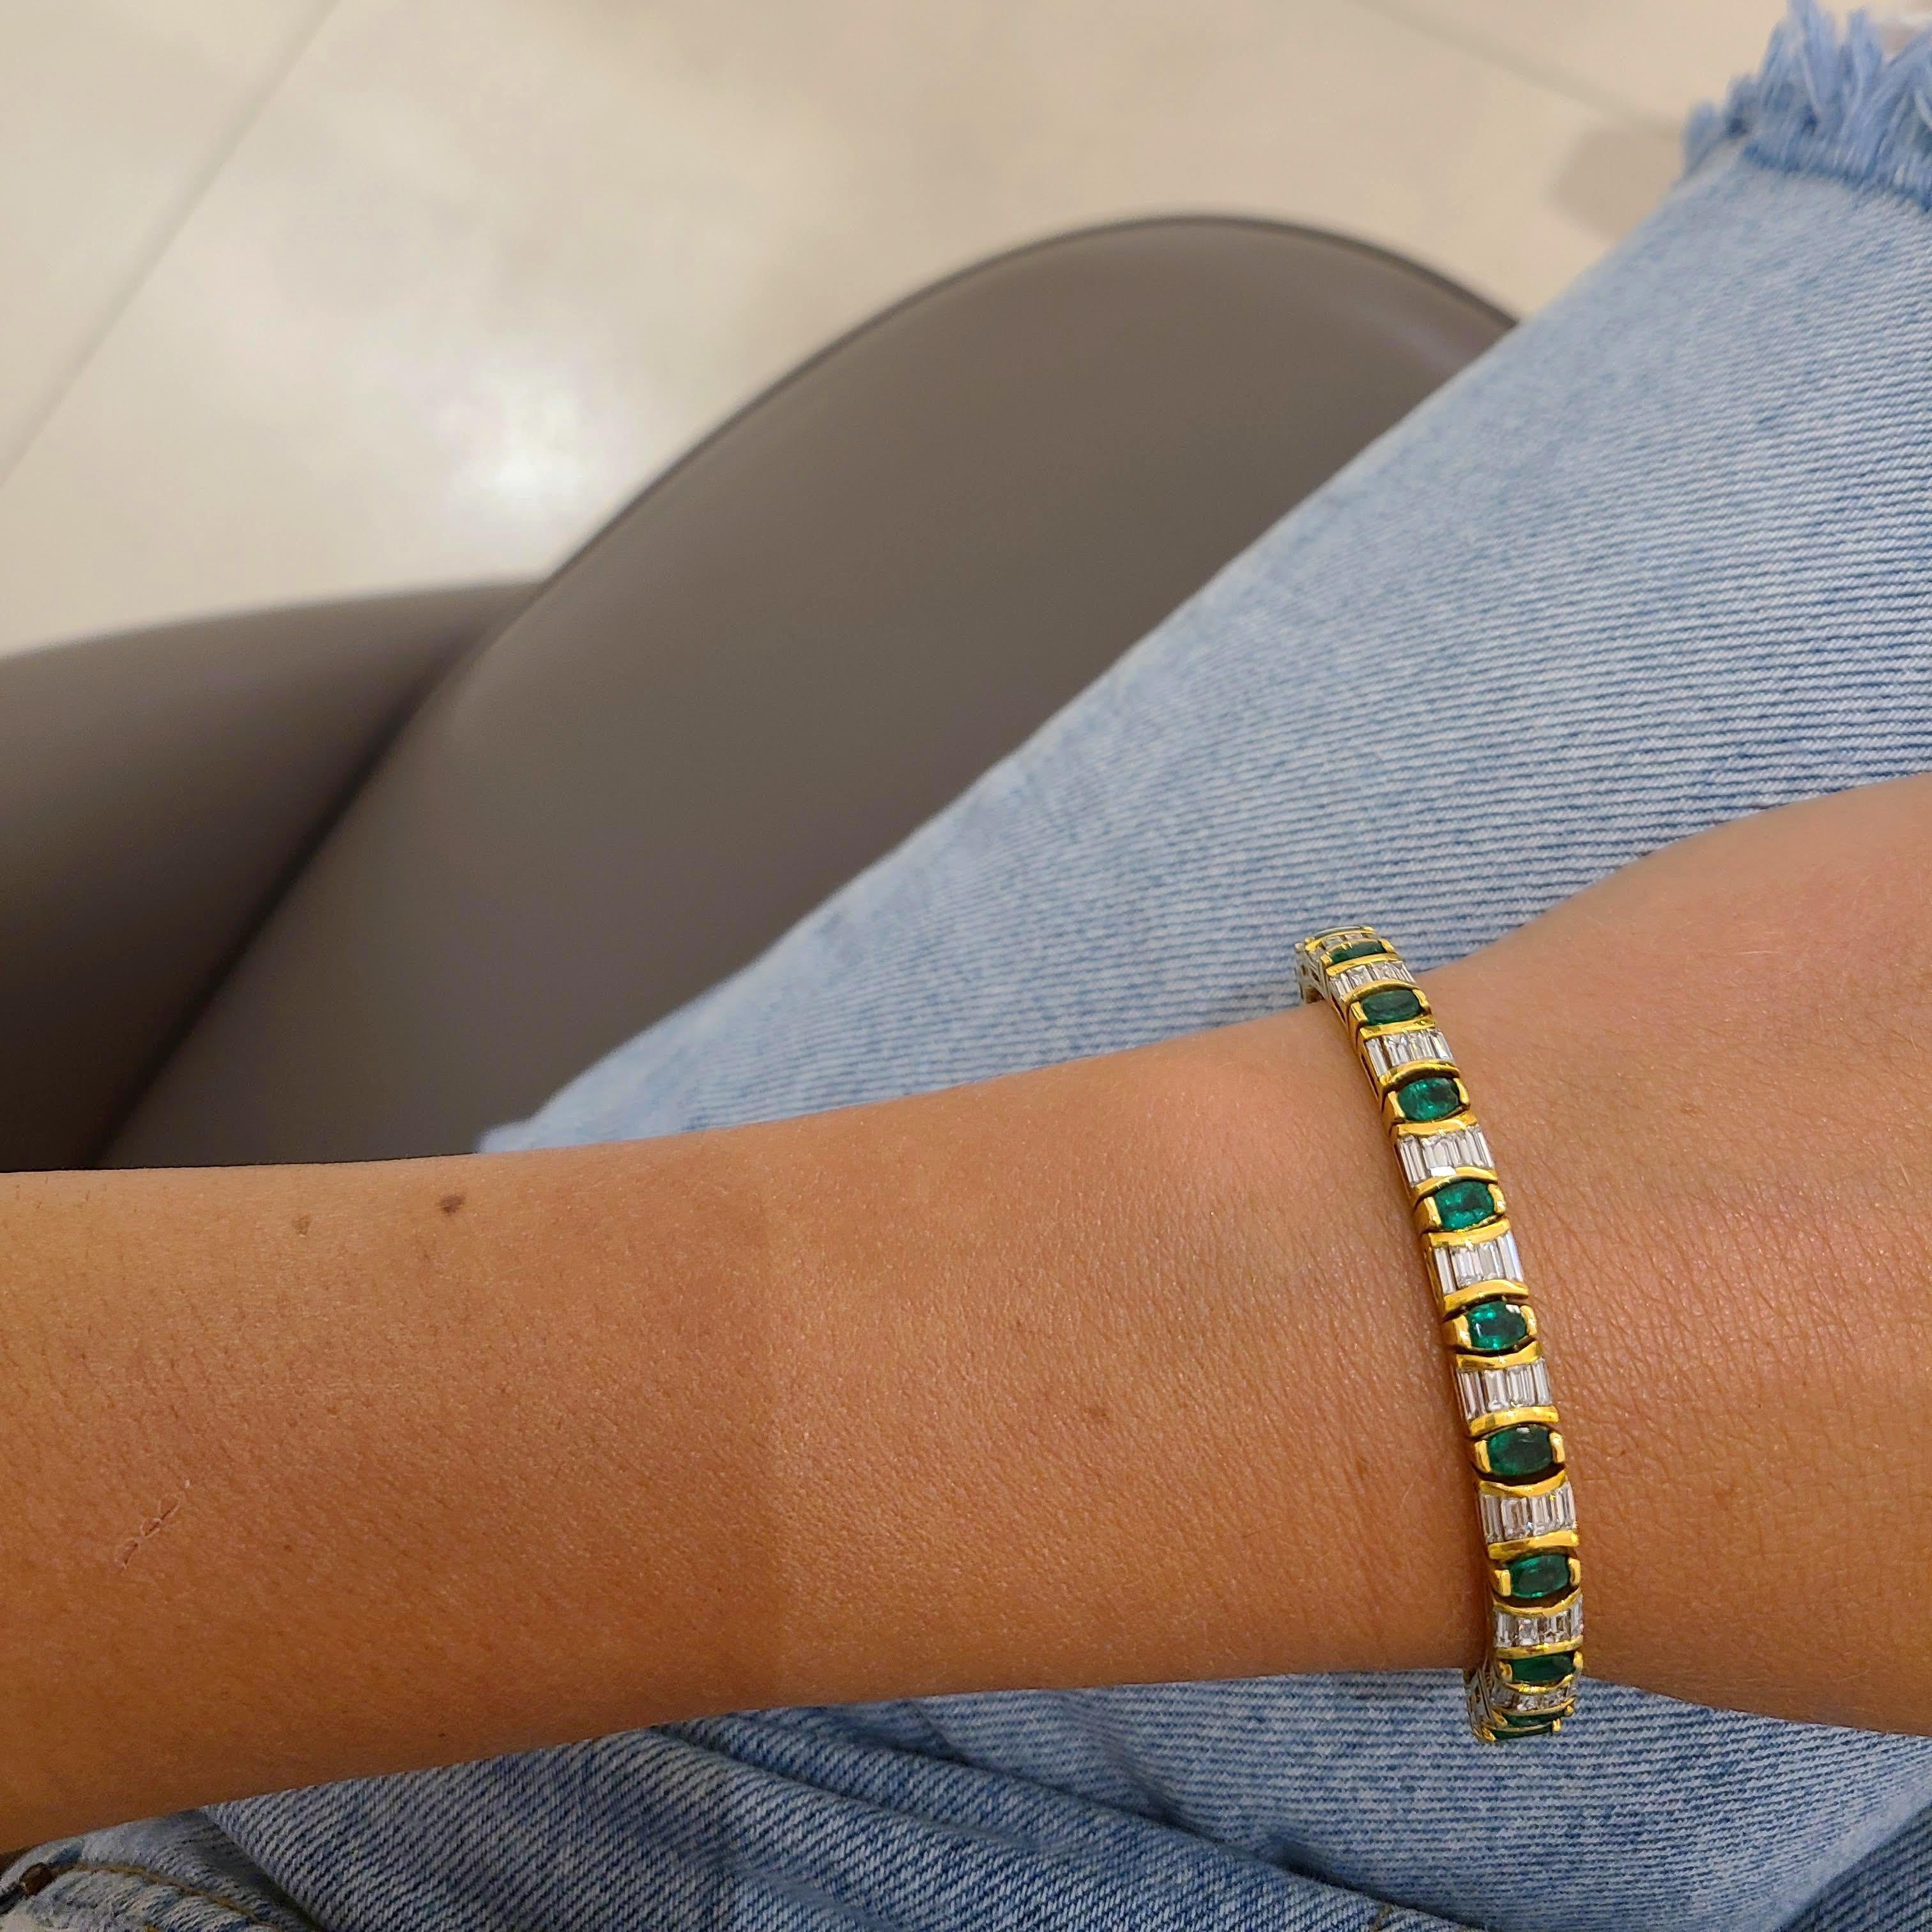 An 18 karat yellow gold line bracelet designed with 22 Oval Emeralds and 88 Baguette Diamonds. Each Emerald is set in a gold bezel. The bracelet measures 7